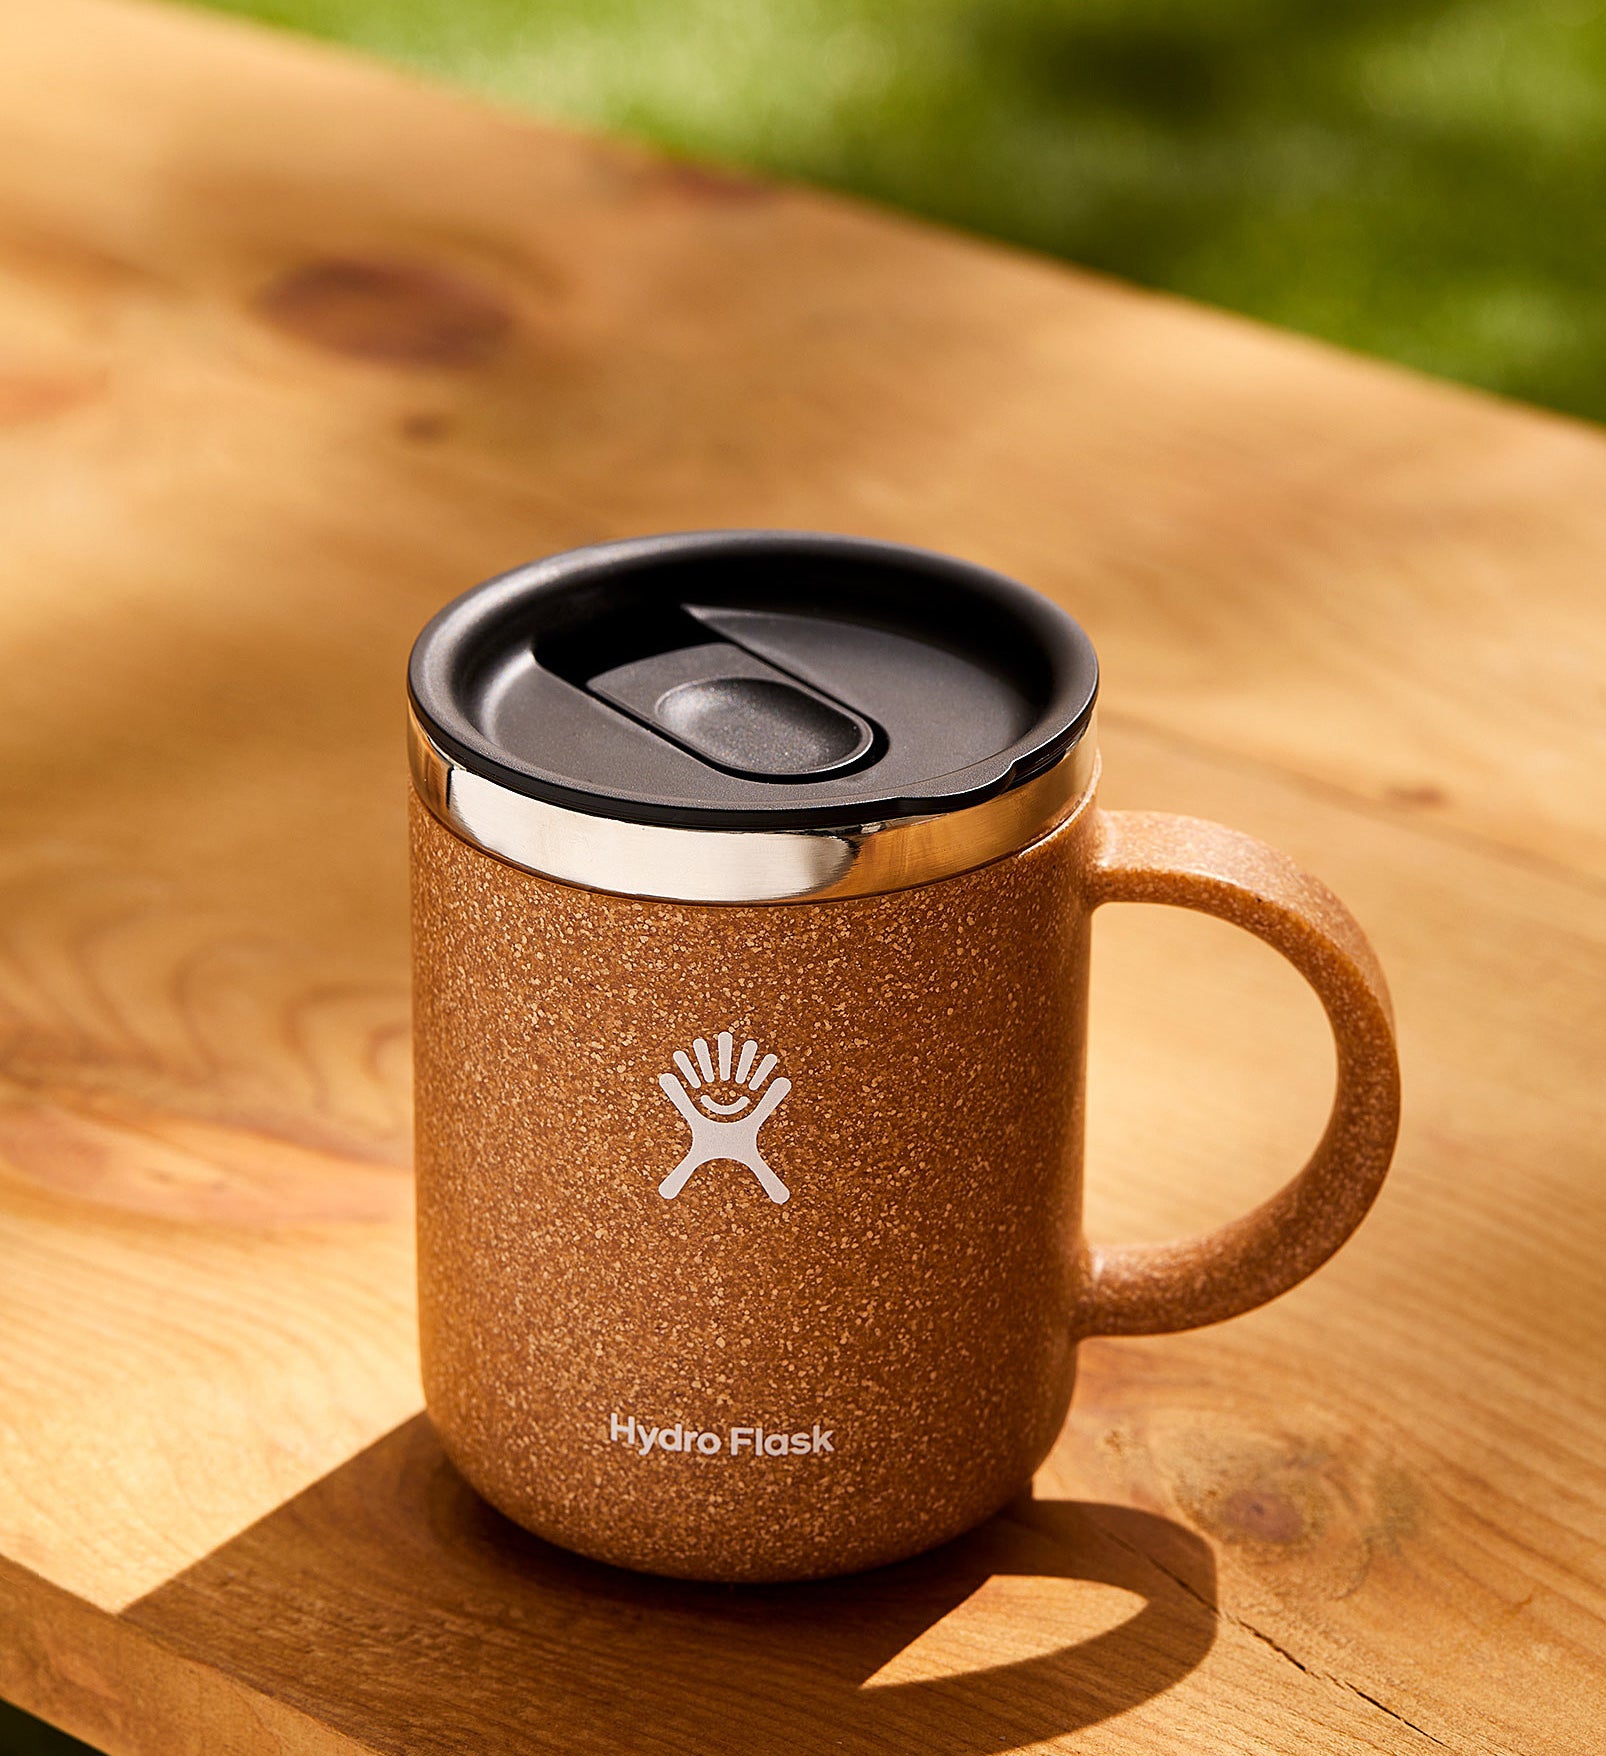 a hydro flask mug with a spill-proof lid